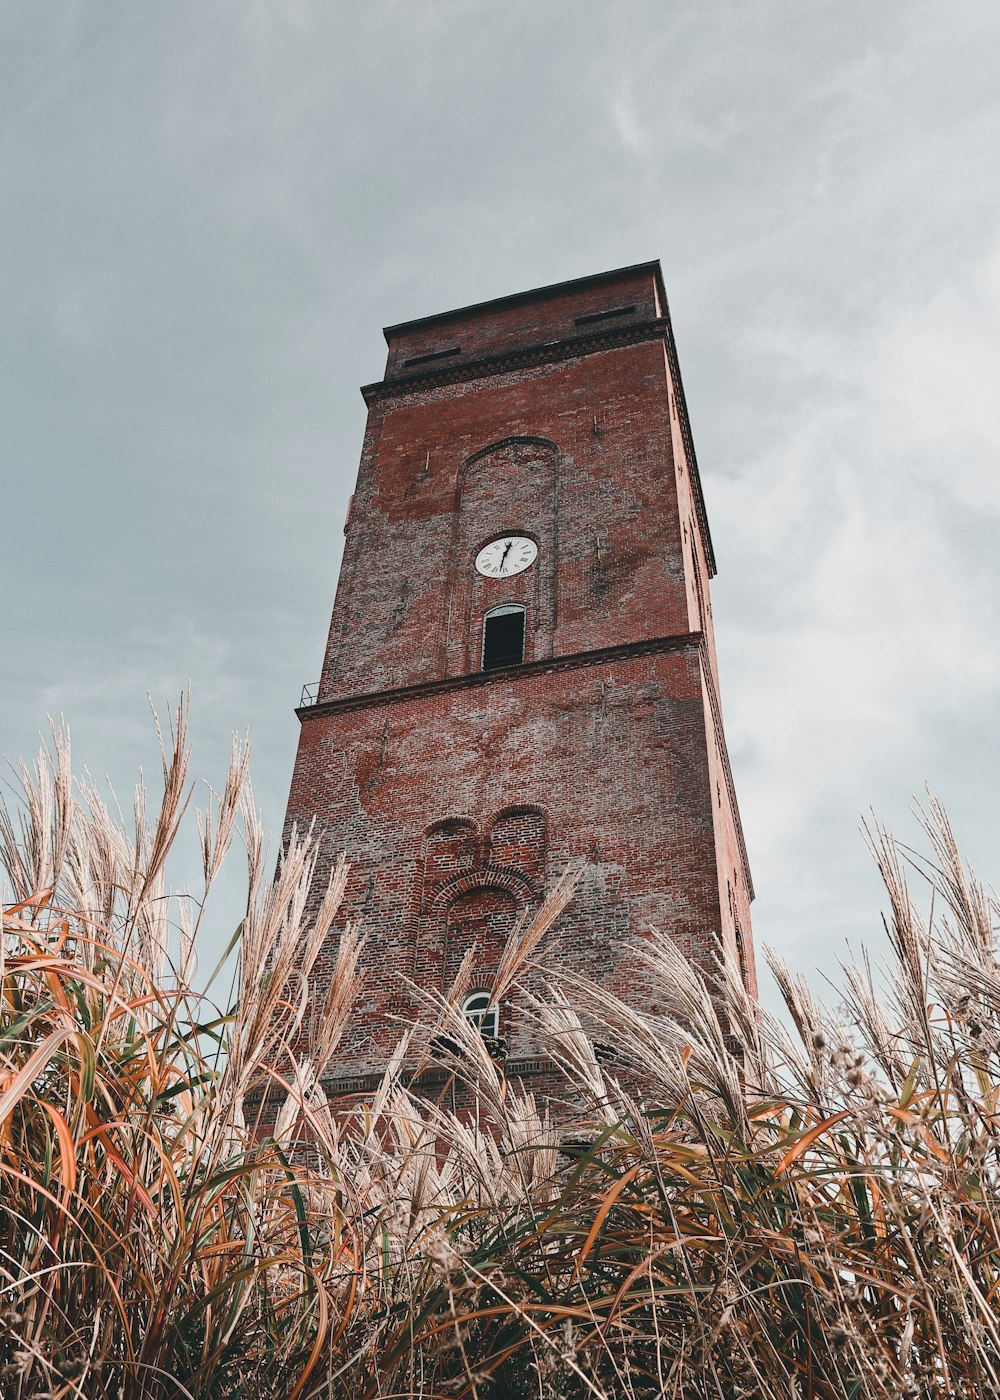 a tall brick tower with a clock on it